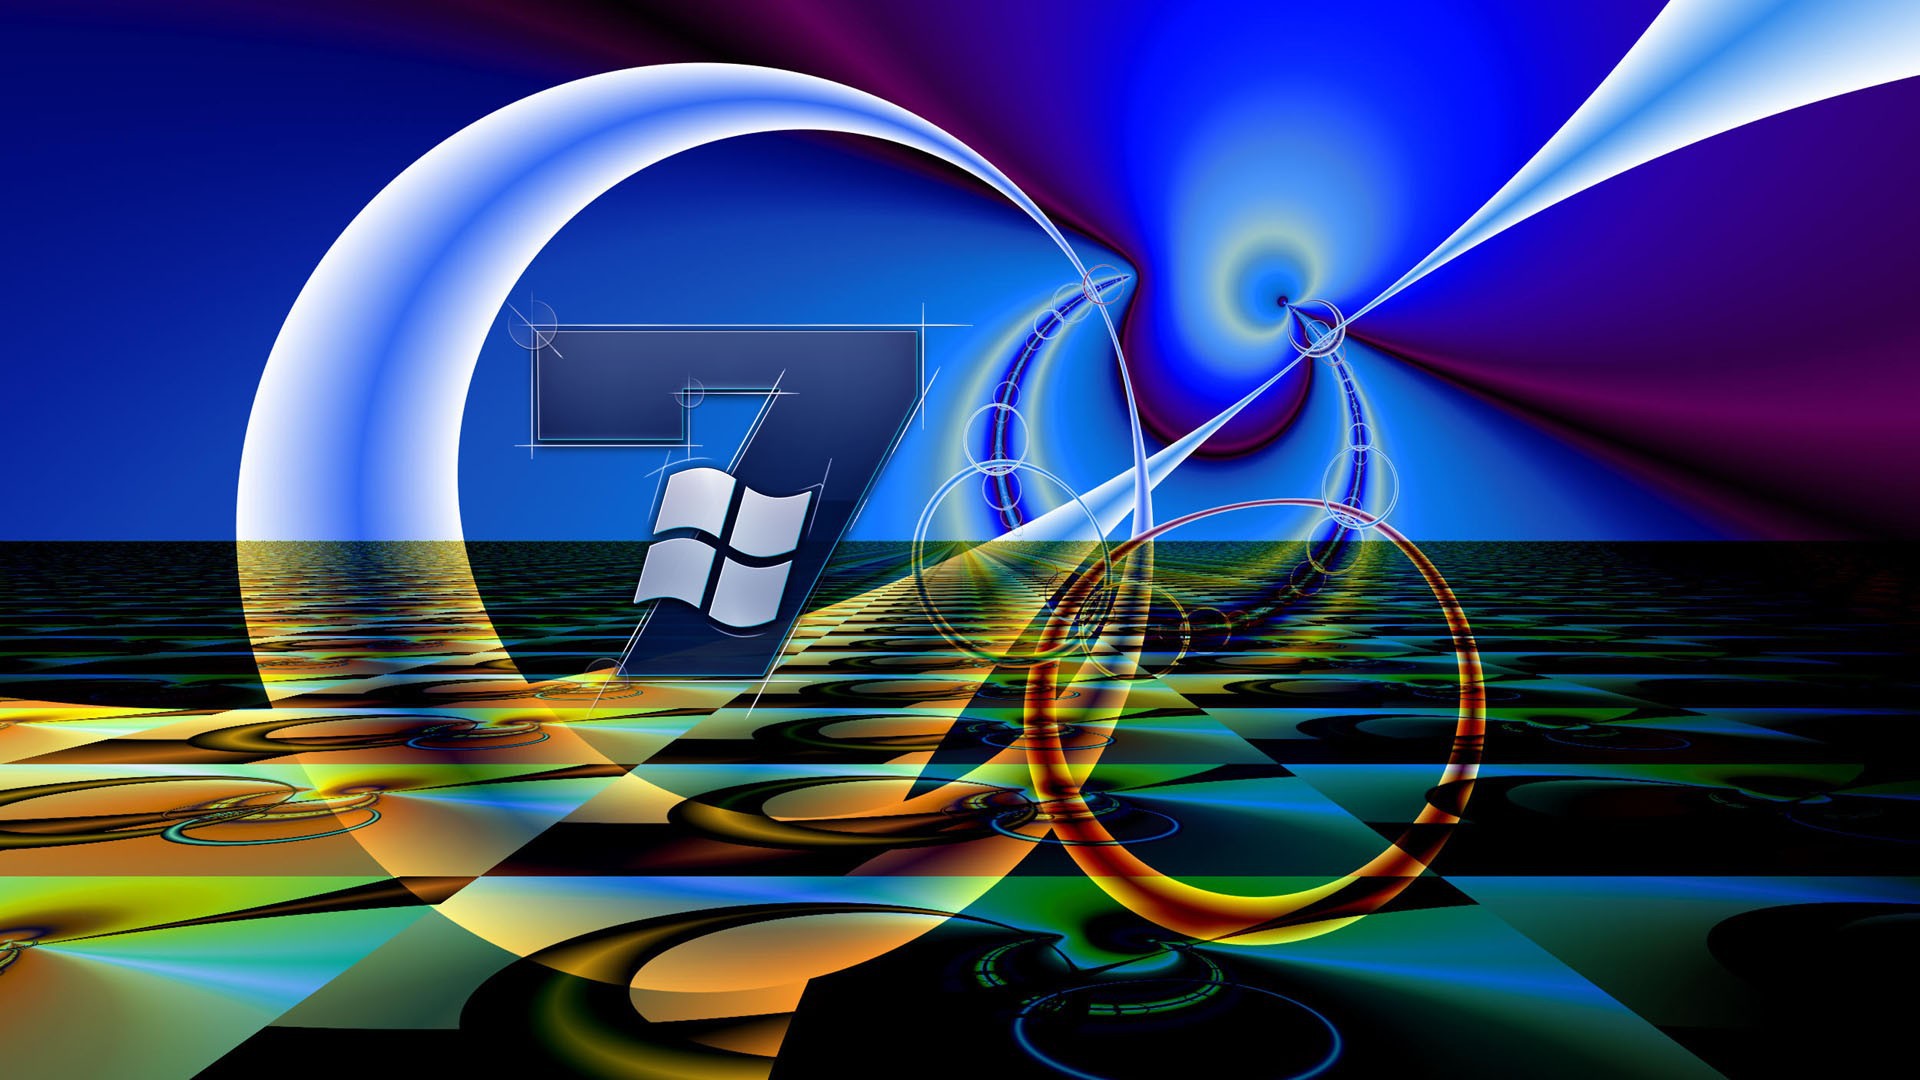 3d wallpaper for pc windows 7 free download